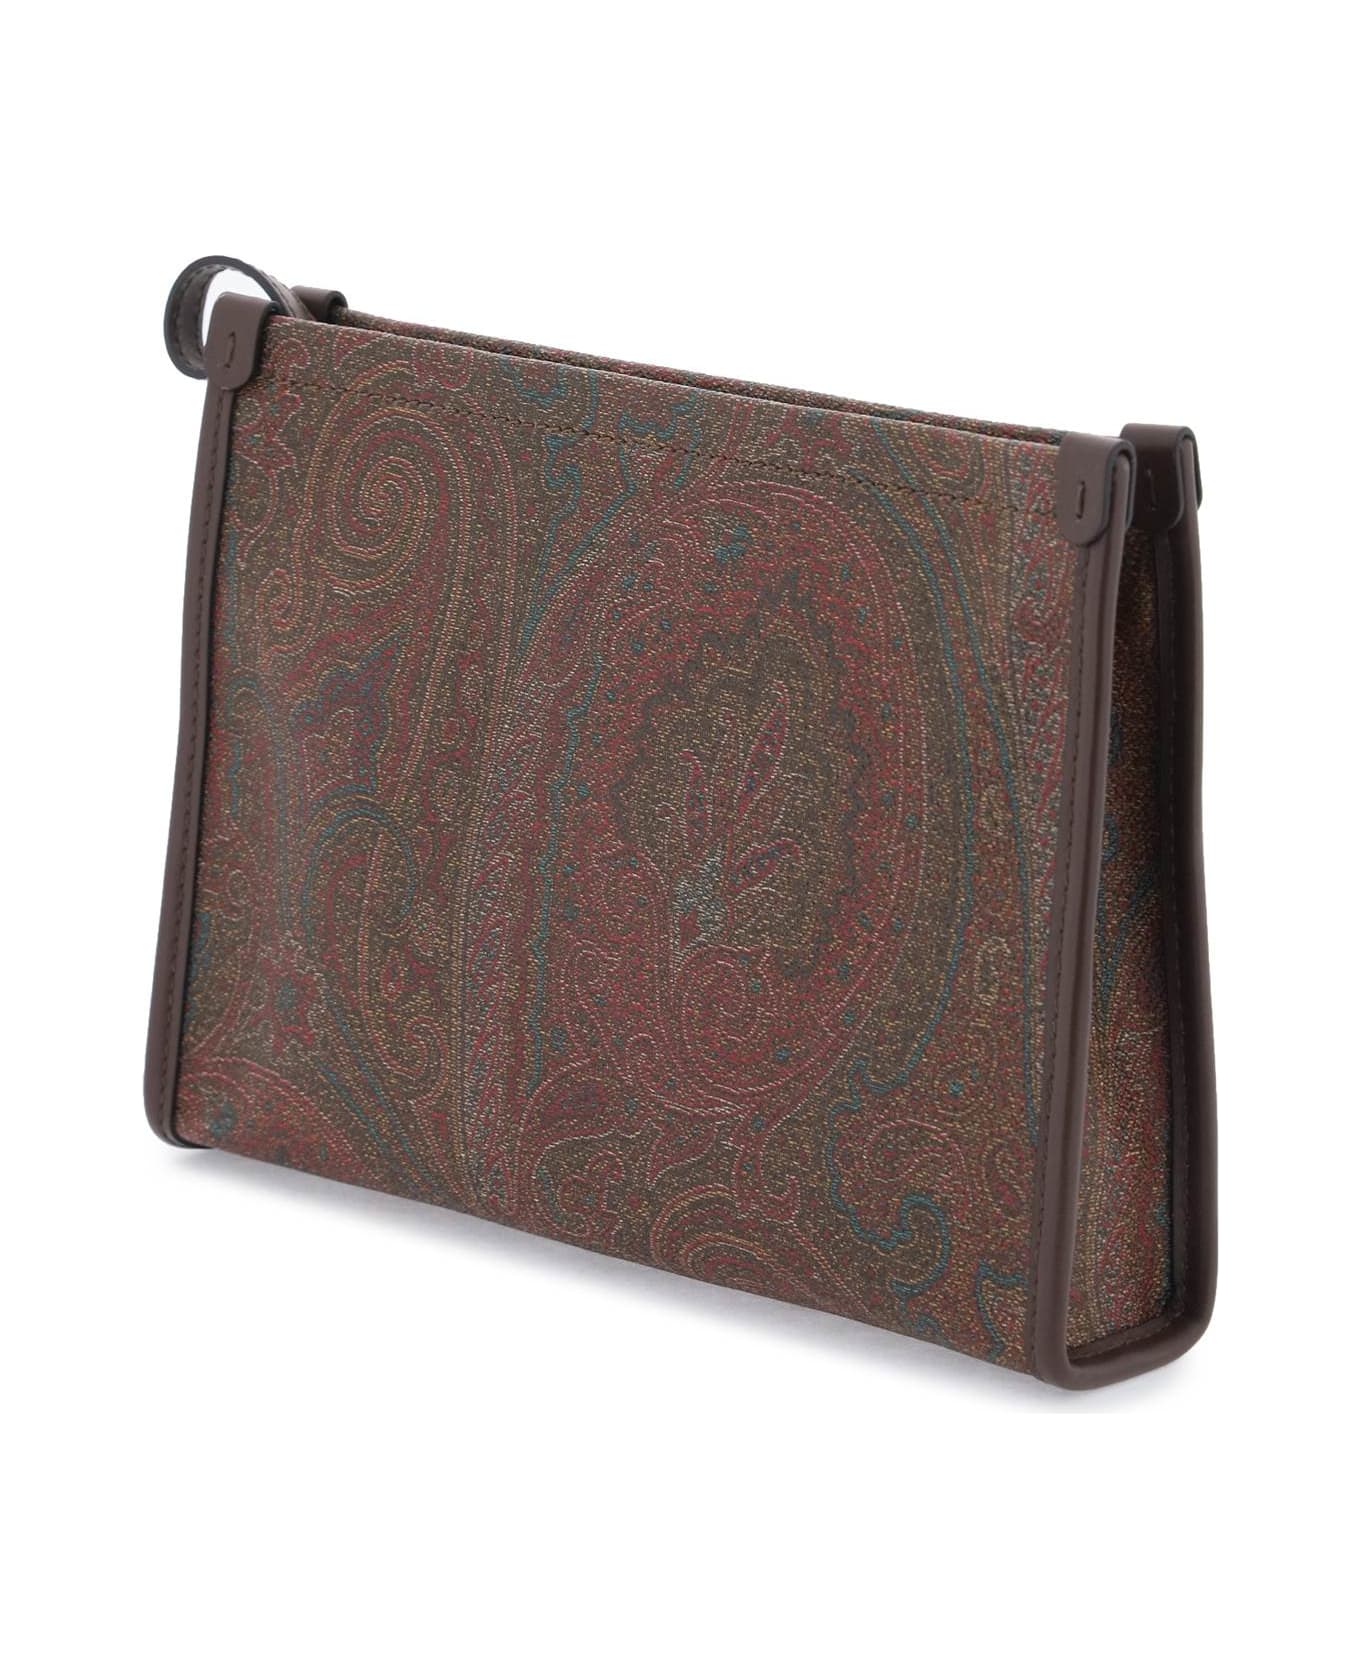 Etro Paisley Pouch With Embroidery - Marrone